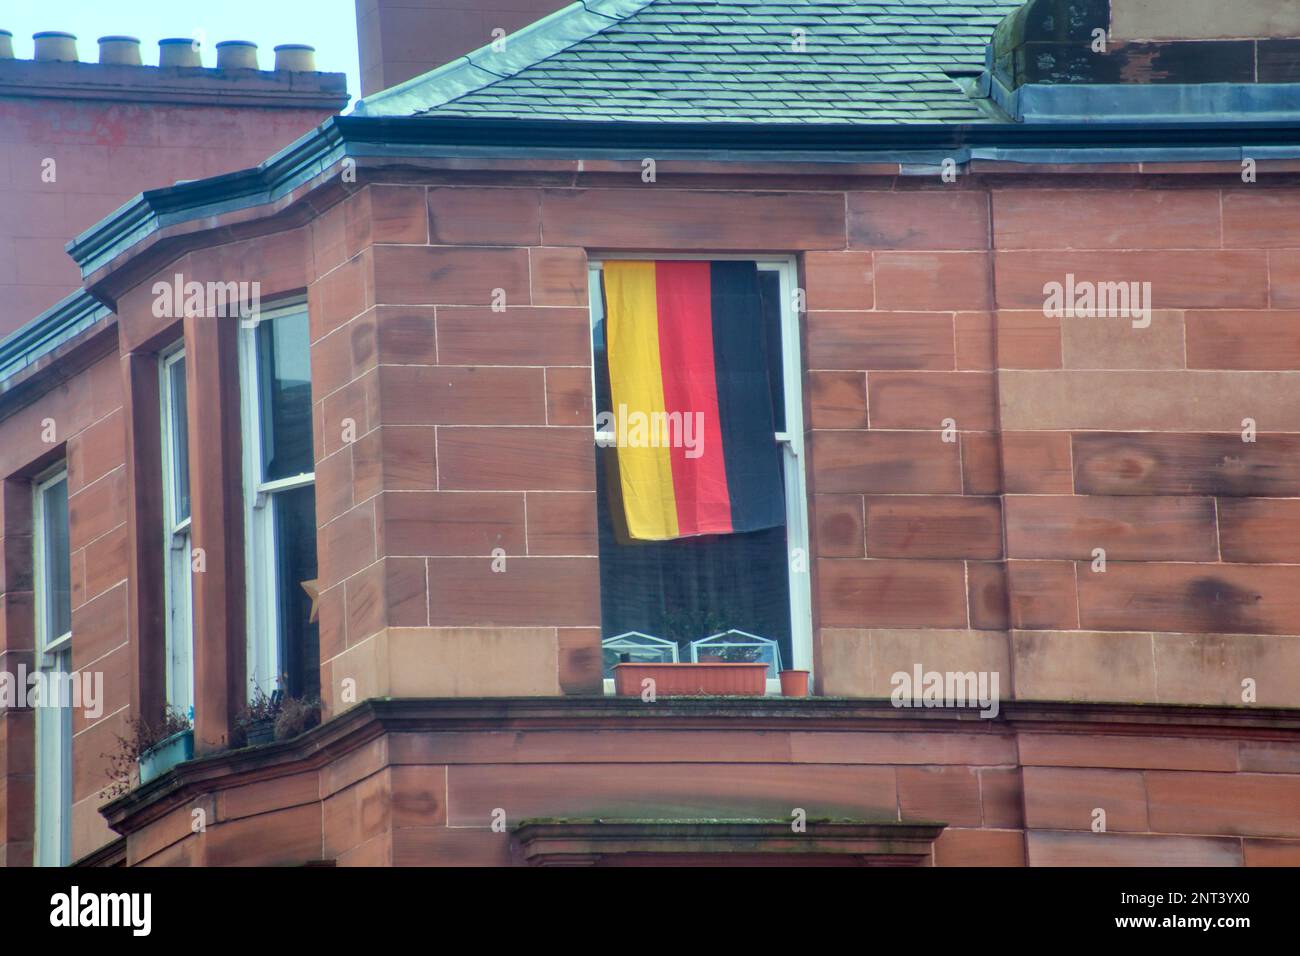 german flag on red sandstone tenement window on the A82 great western road Glasgow, Scotland, UK Stock Photo